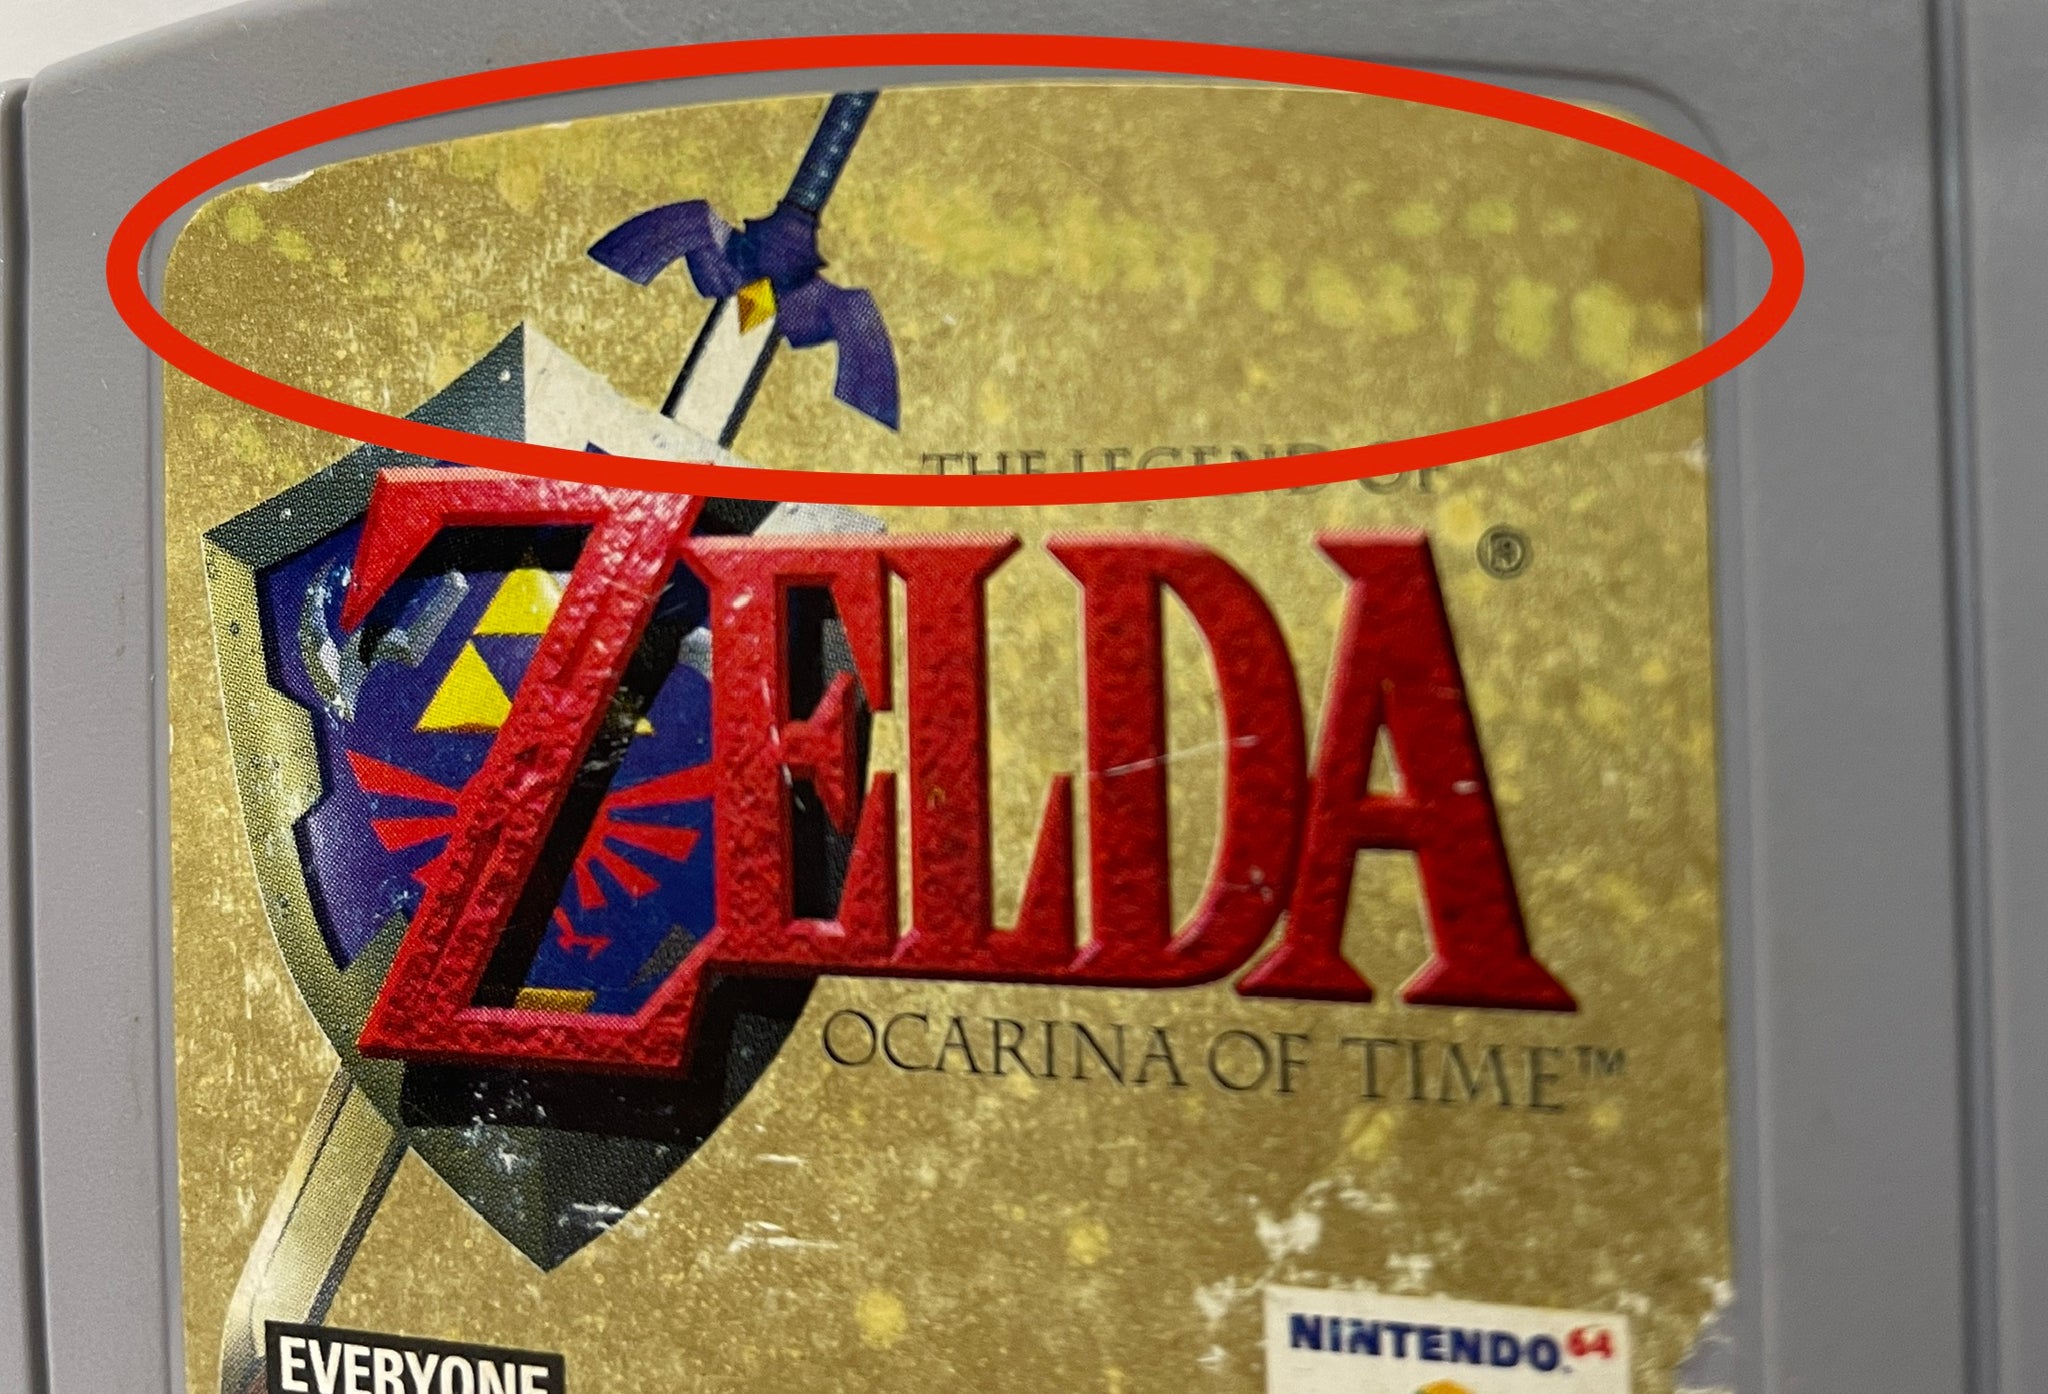 1998 N64 Nintendo (USA) The Legend of Zelda: Ocarina of Time Sealed Video  Game - WATA 9.4/A++ on Goldin Auctions